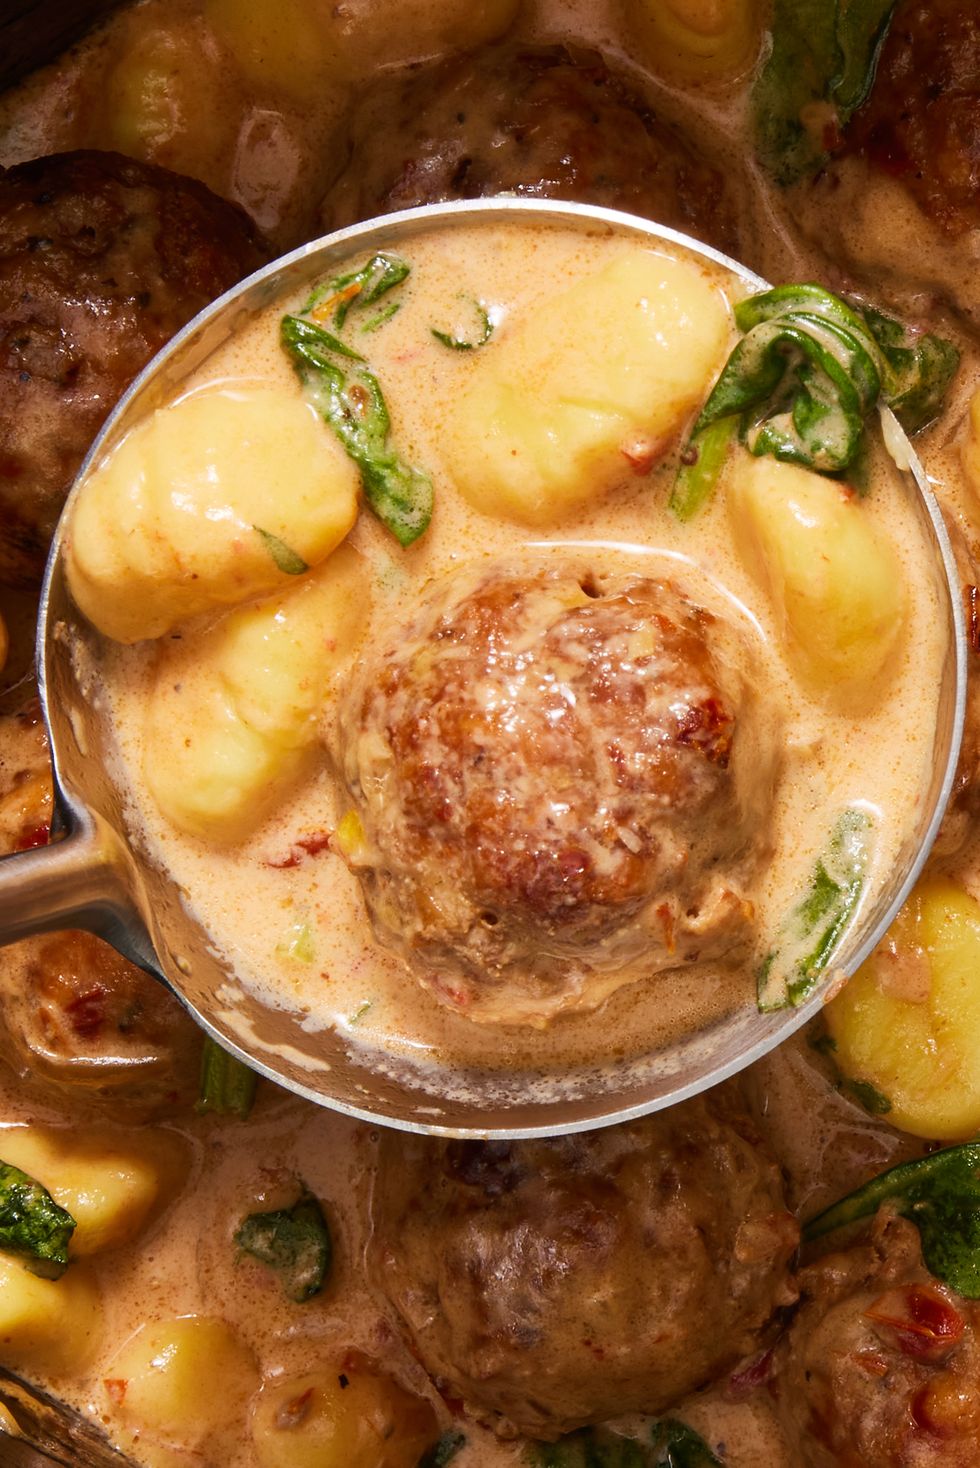 chicken meatballs and gnocchi in a creamy tuscan sauce